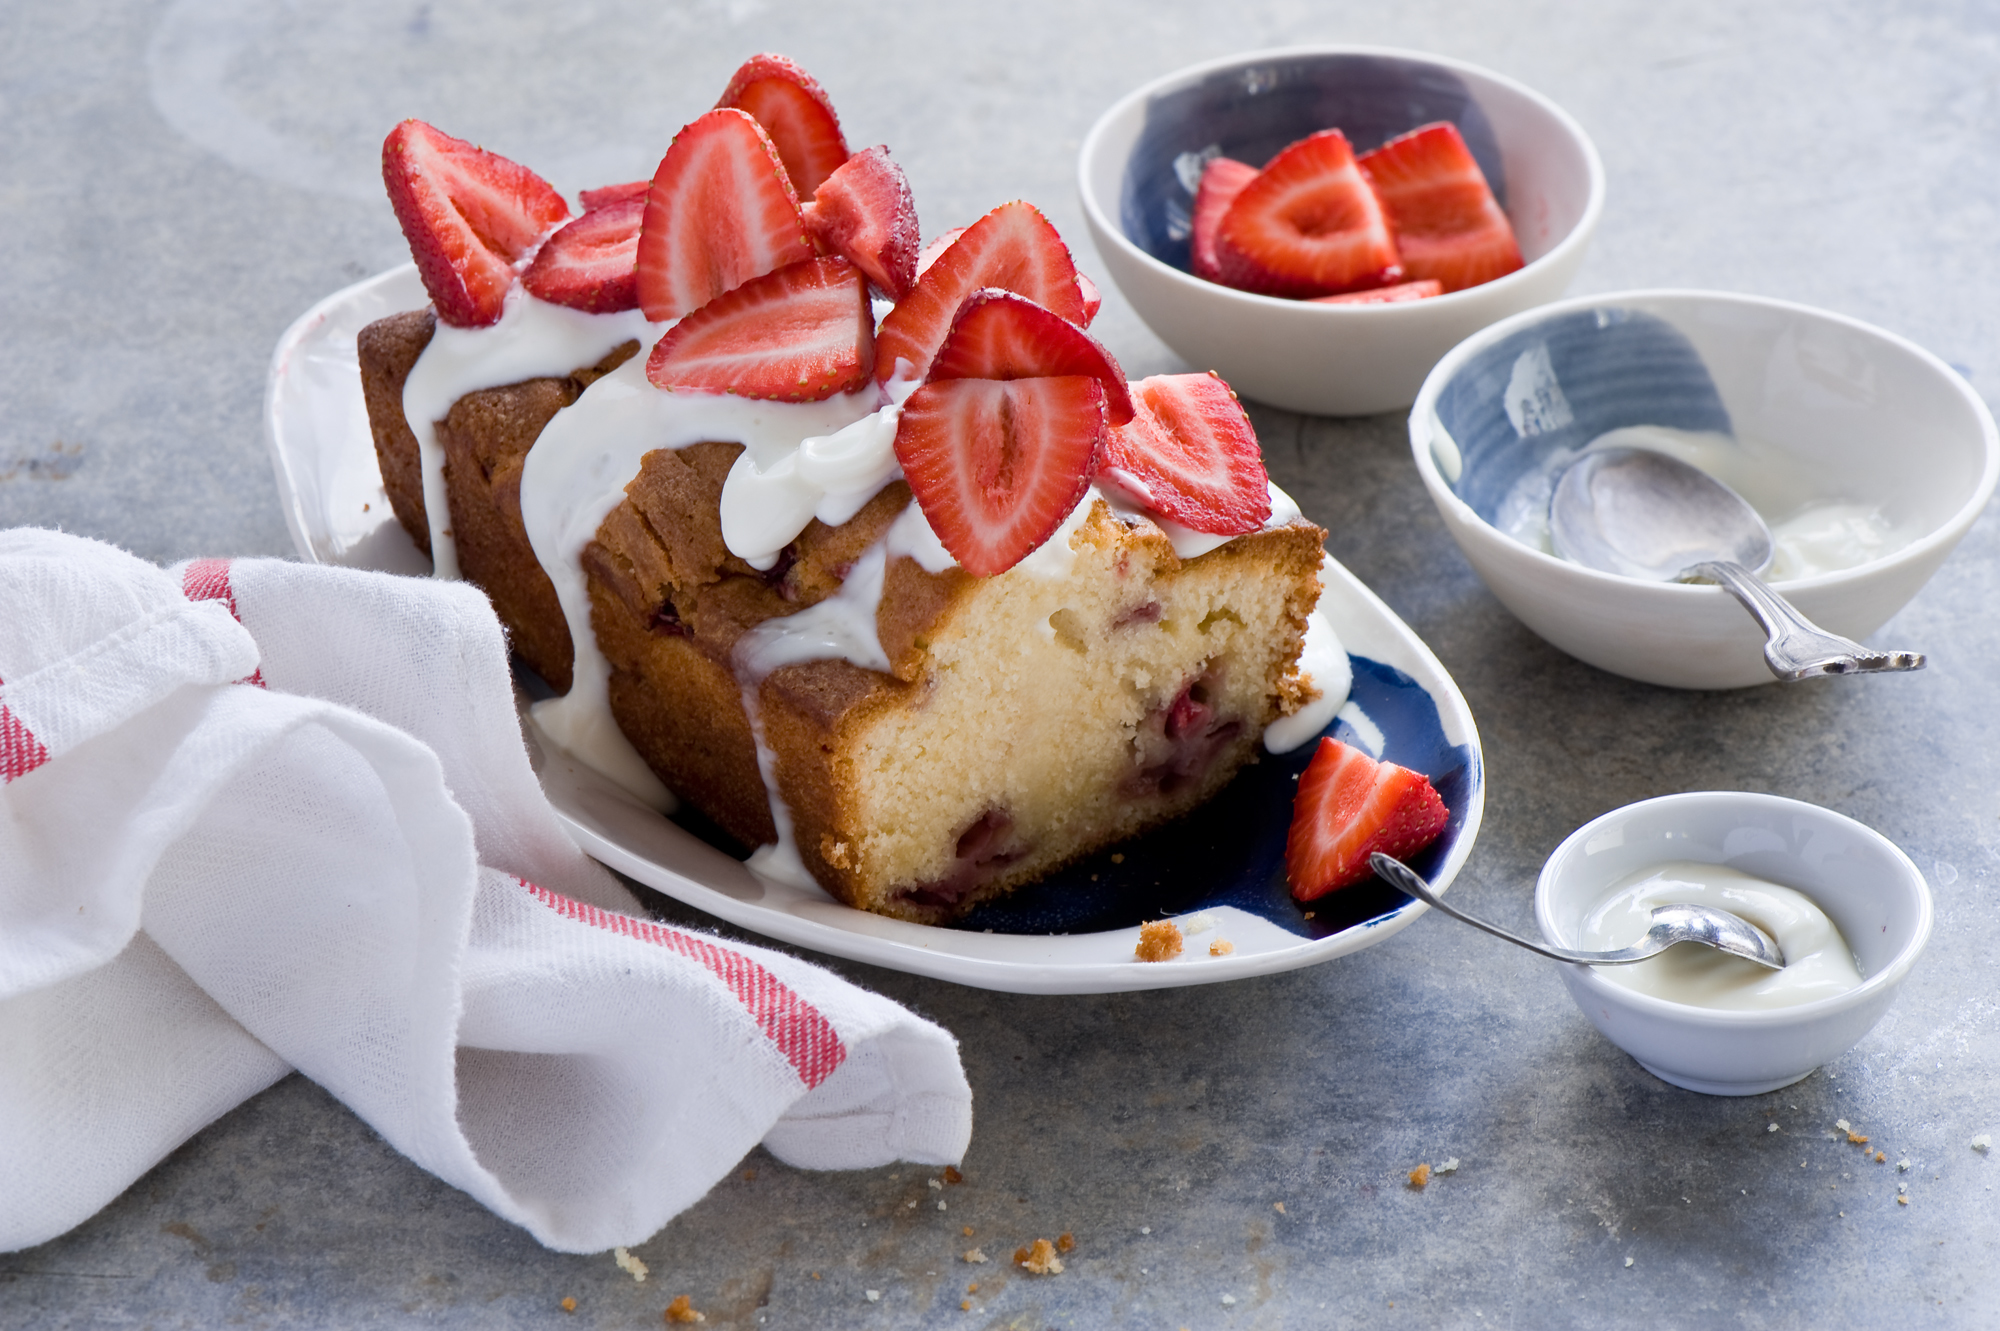 bakery products, strawberry, baking, food download for free